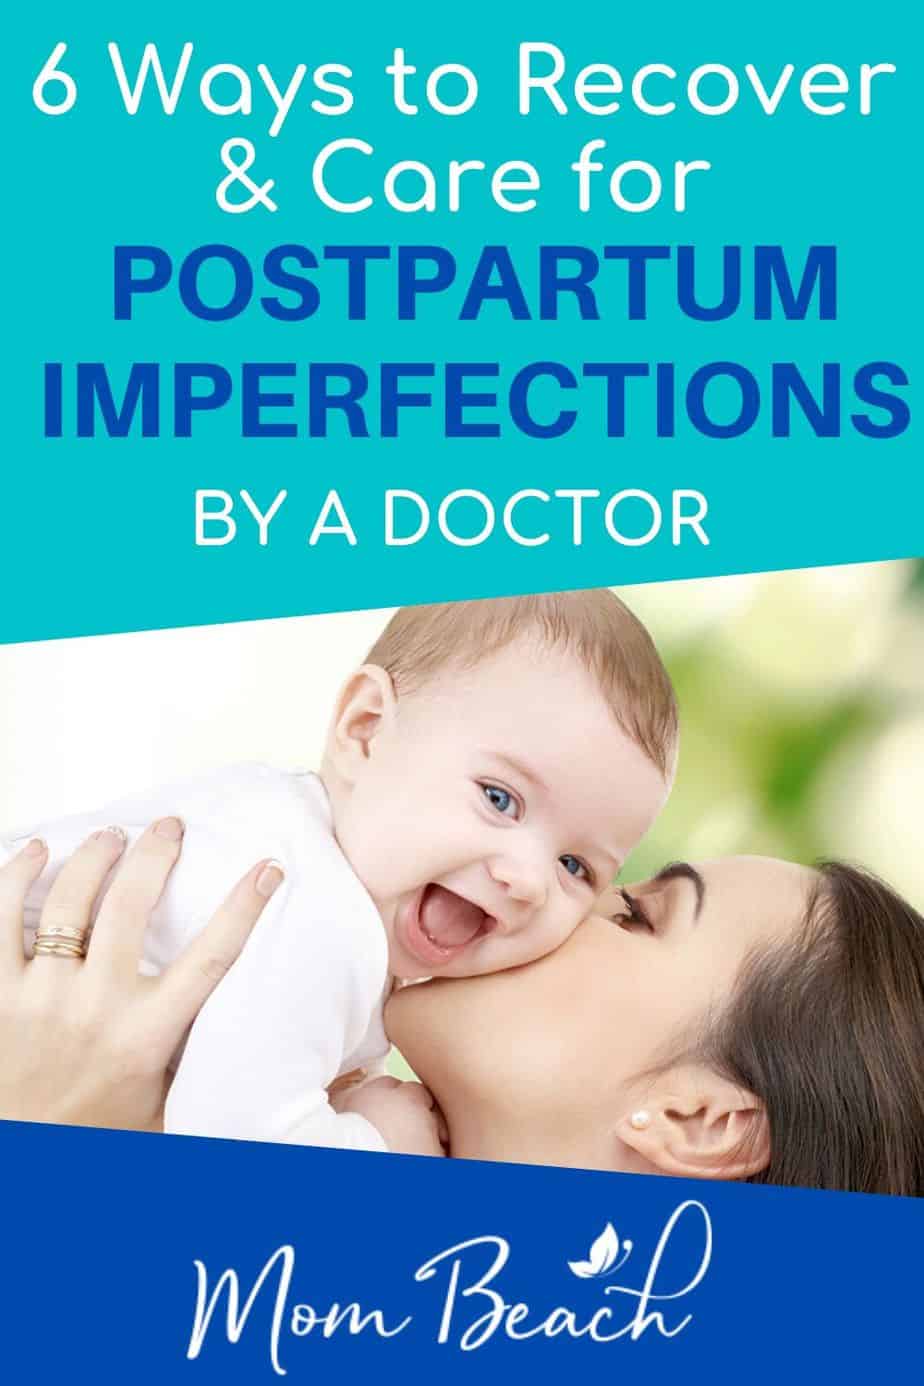 Postpartum care after birth recovery can be difficult. In this article, a licensed doctor features 6 postpartum imperfections and how to care for them. Post partum recovery is tough when you are just trying to bond with your baby. There are lots of feelings you can have. We also cover recovery kits and packages as well. #postpartumcare #postpartumcarerecovery #postpartumafterbirthrecovery